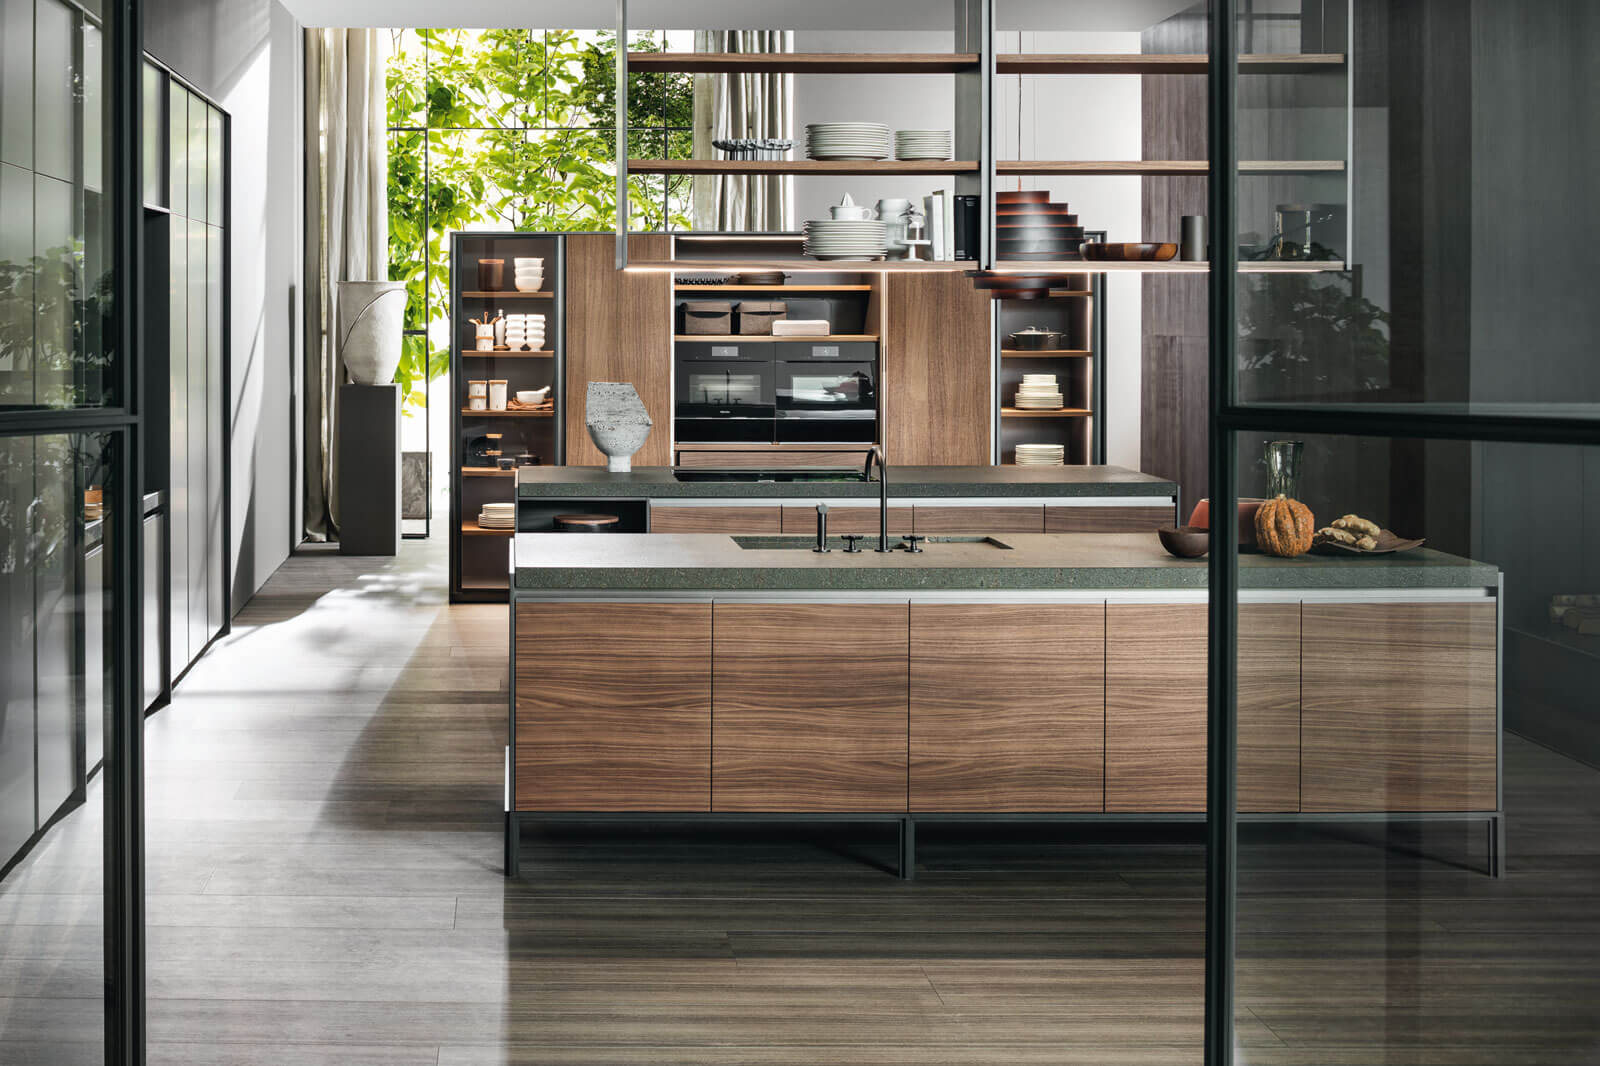 Eco-Friendly Choices For A Sustainable Kitchen Design